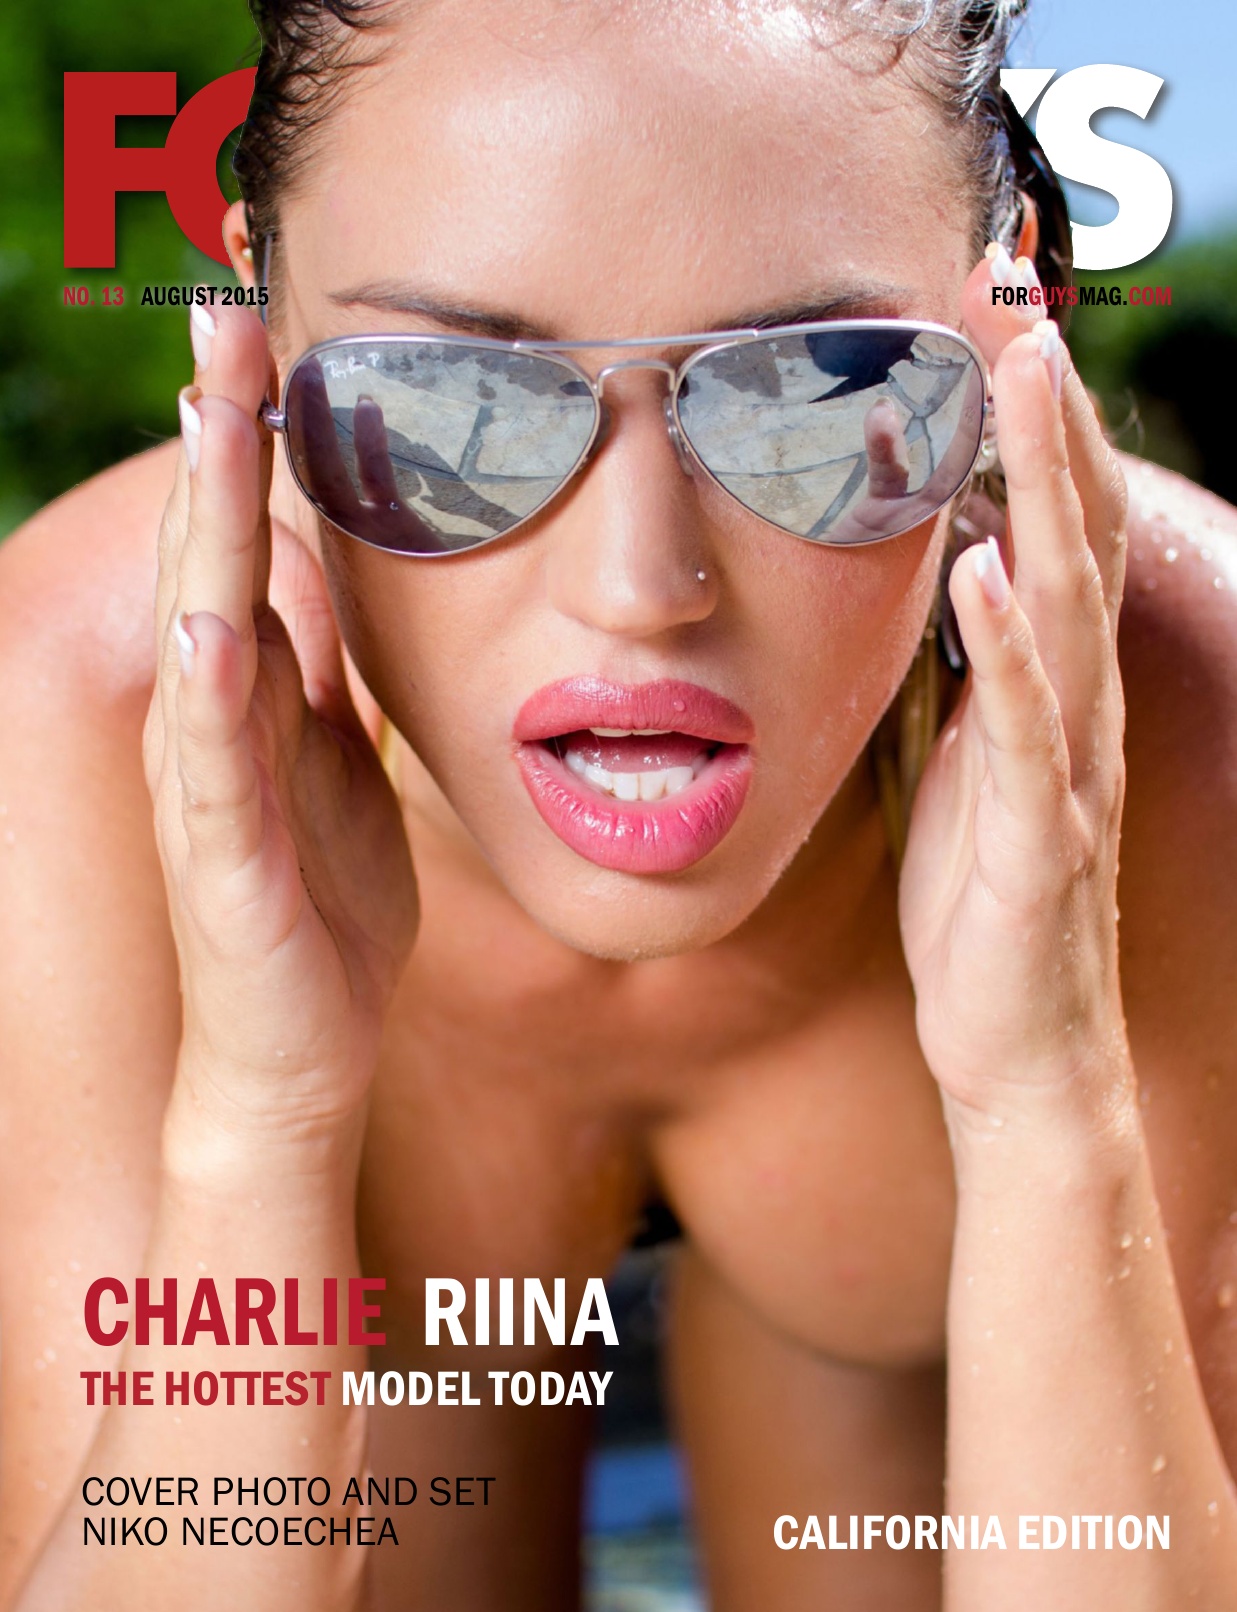 Charlie Riina looking incredible in For Guys Magazine